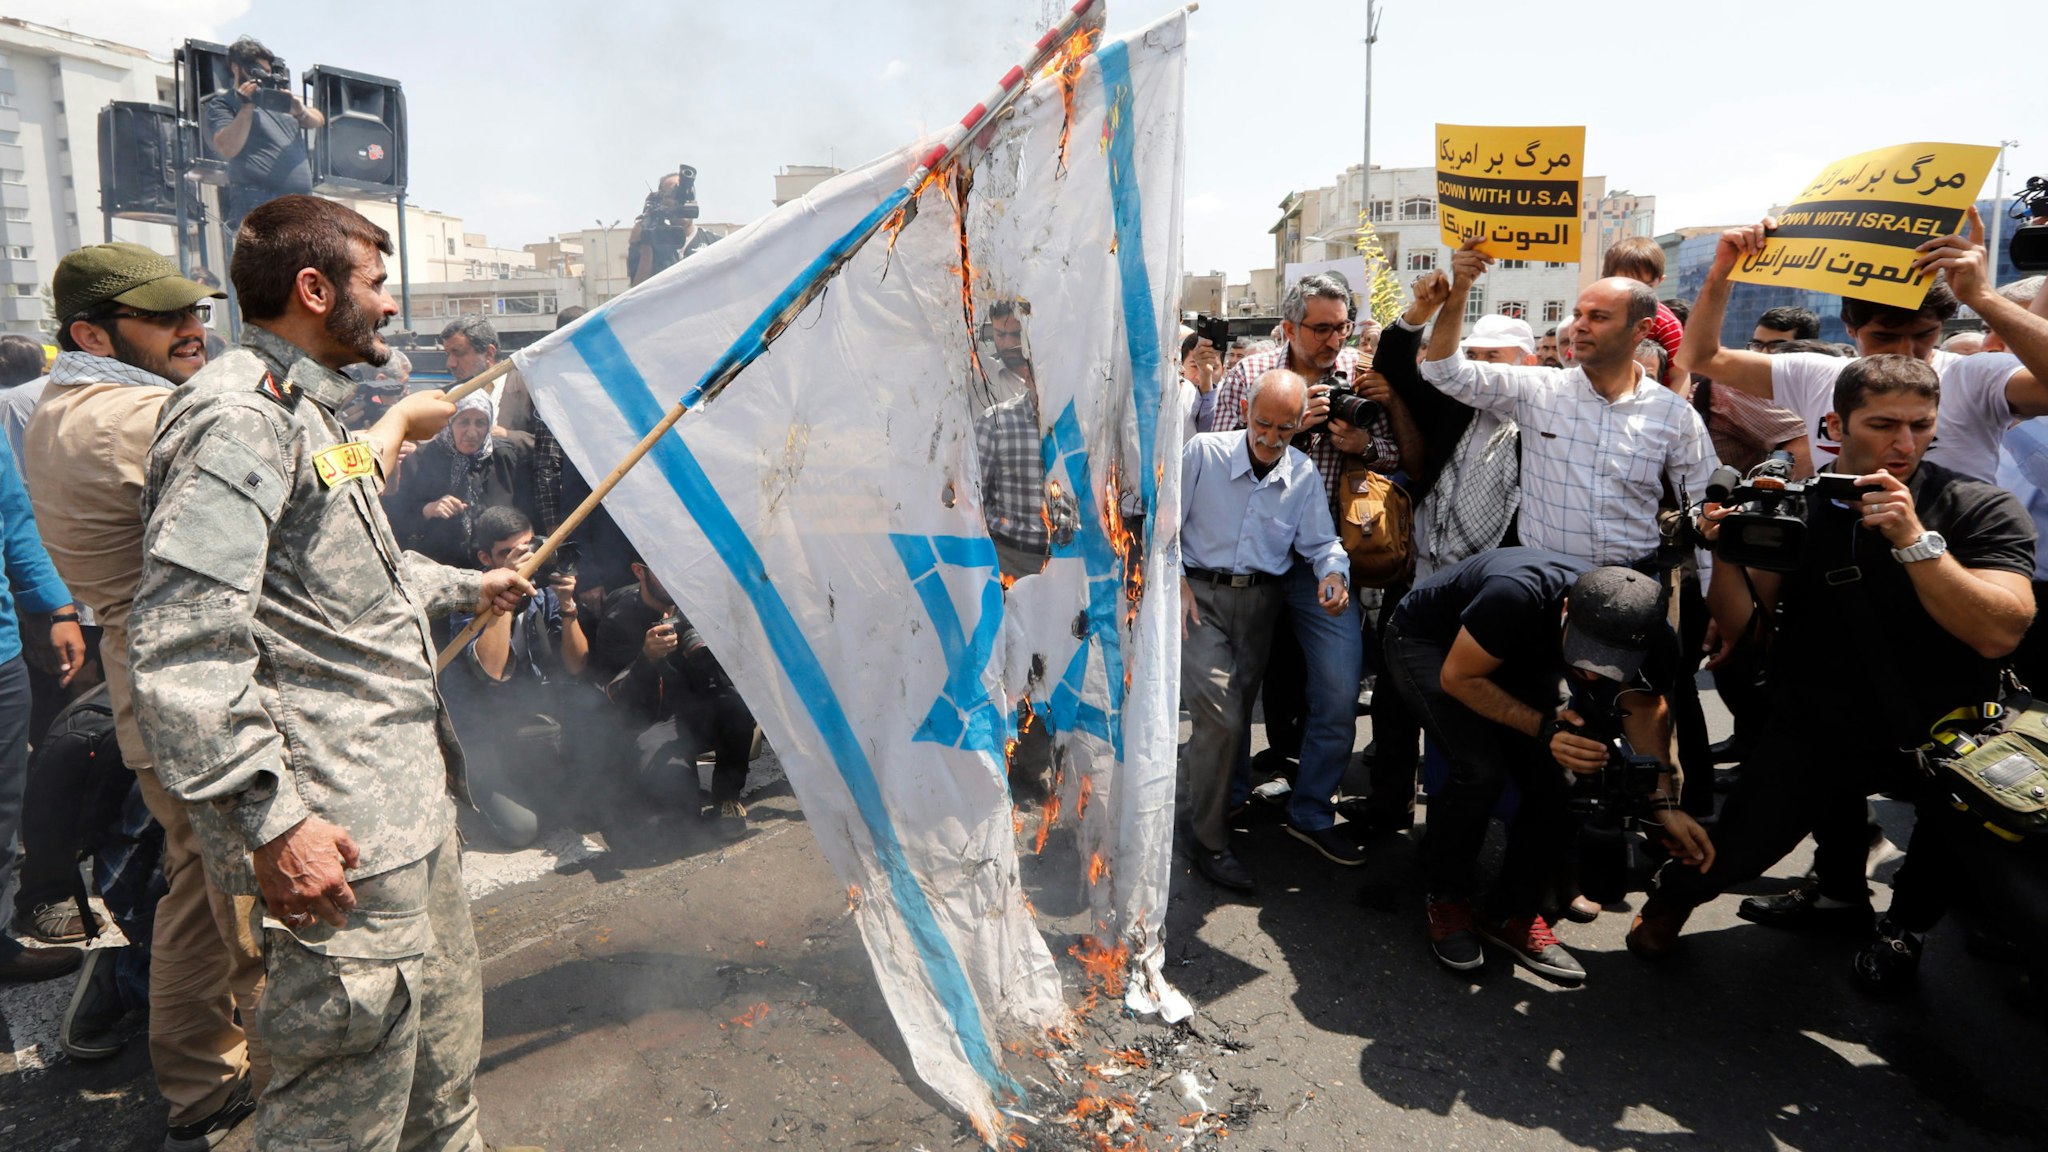 Iranians burn a US and an Israeli flag as they take part in an anti-US and Israel demonstration after weekly Friday prayers in the capital Tehran on May 18, 2018, to show their solidarity with Palestinians over recent violent events in Gaza. The banners read in Farsi "death to America".